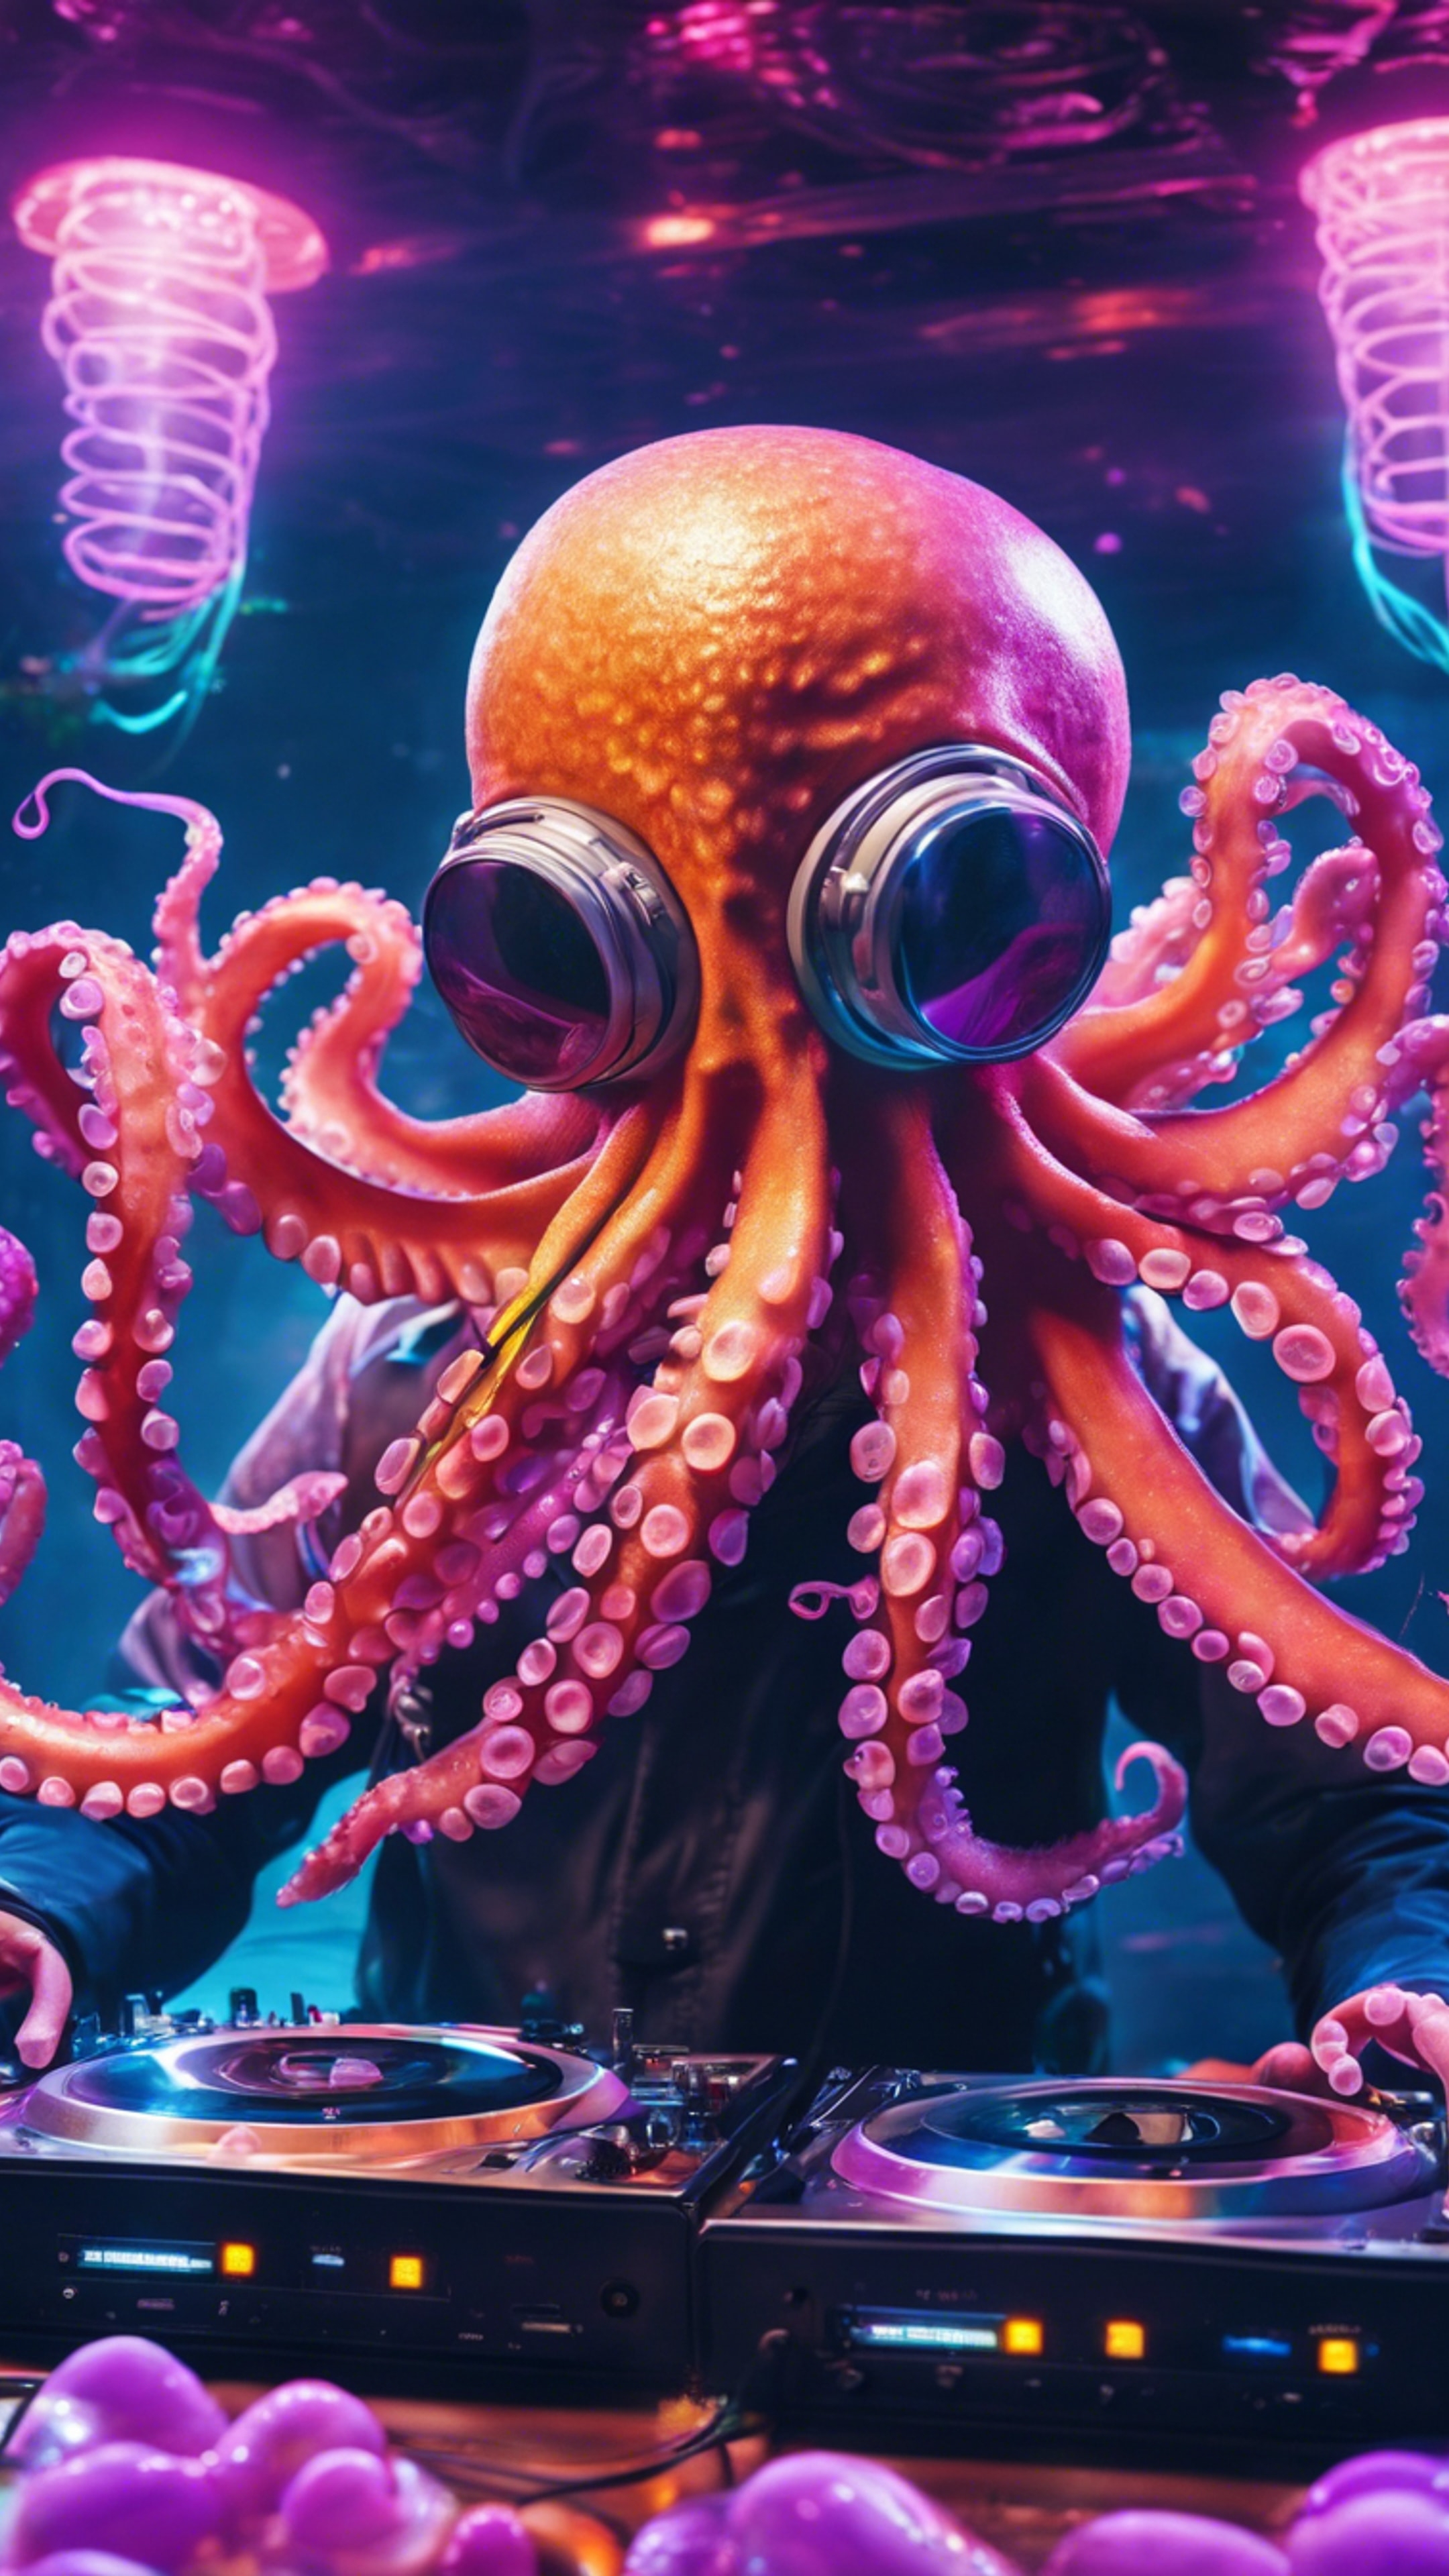 An octopus DJ controlling the music at an underwater rave amidst neon jellyfish. วอลล์เปเปอร์[8d0f478d59094f5192d2]